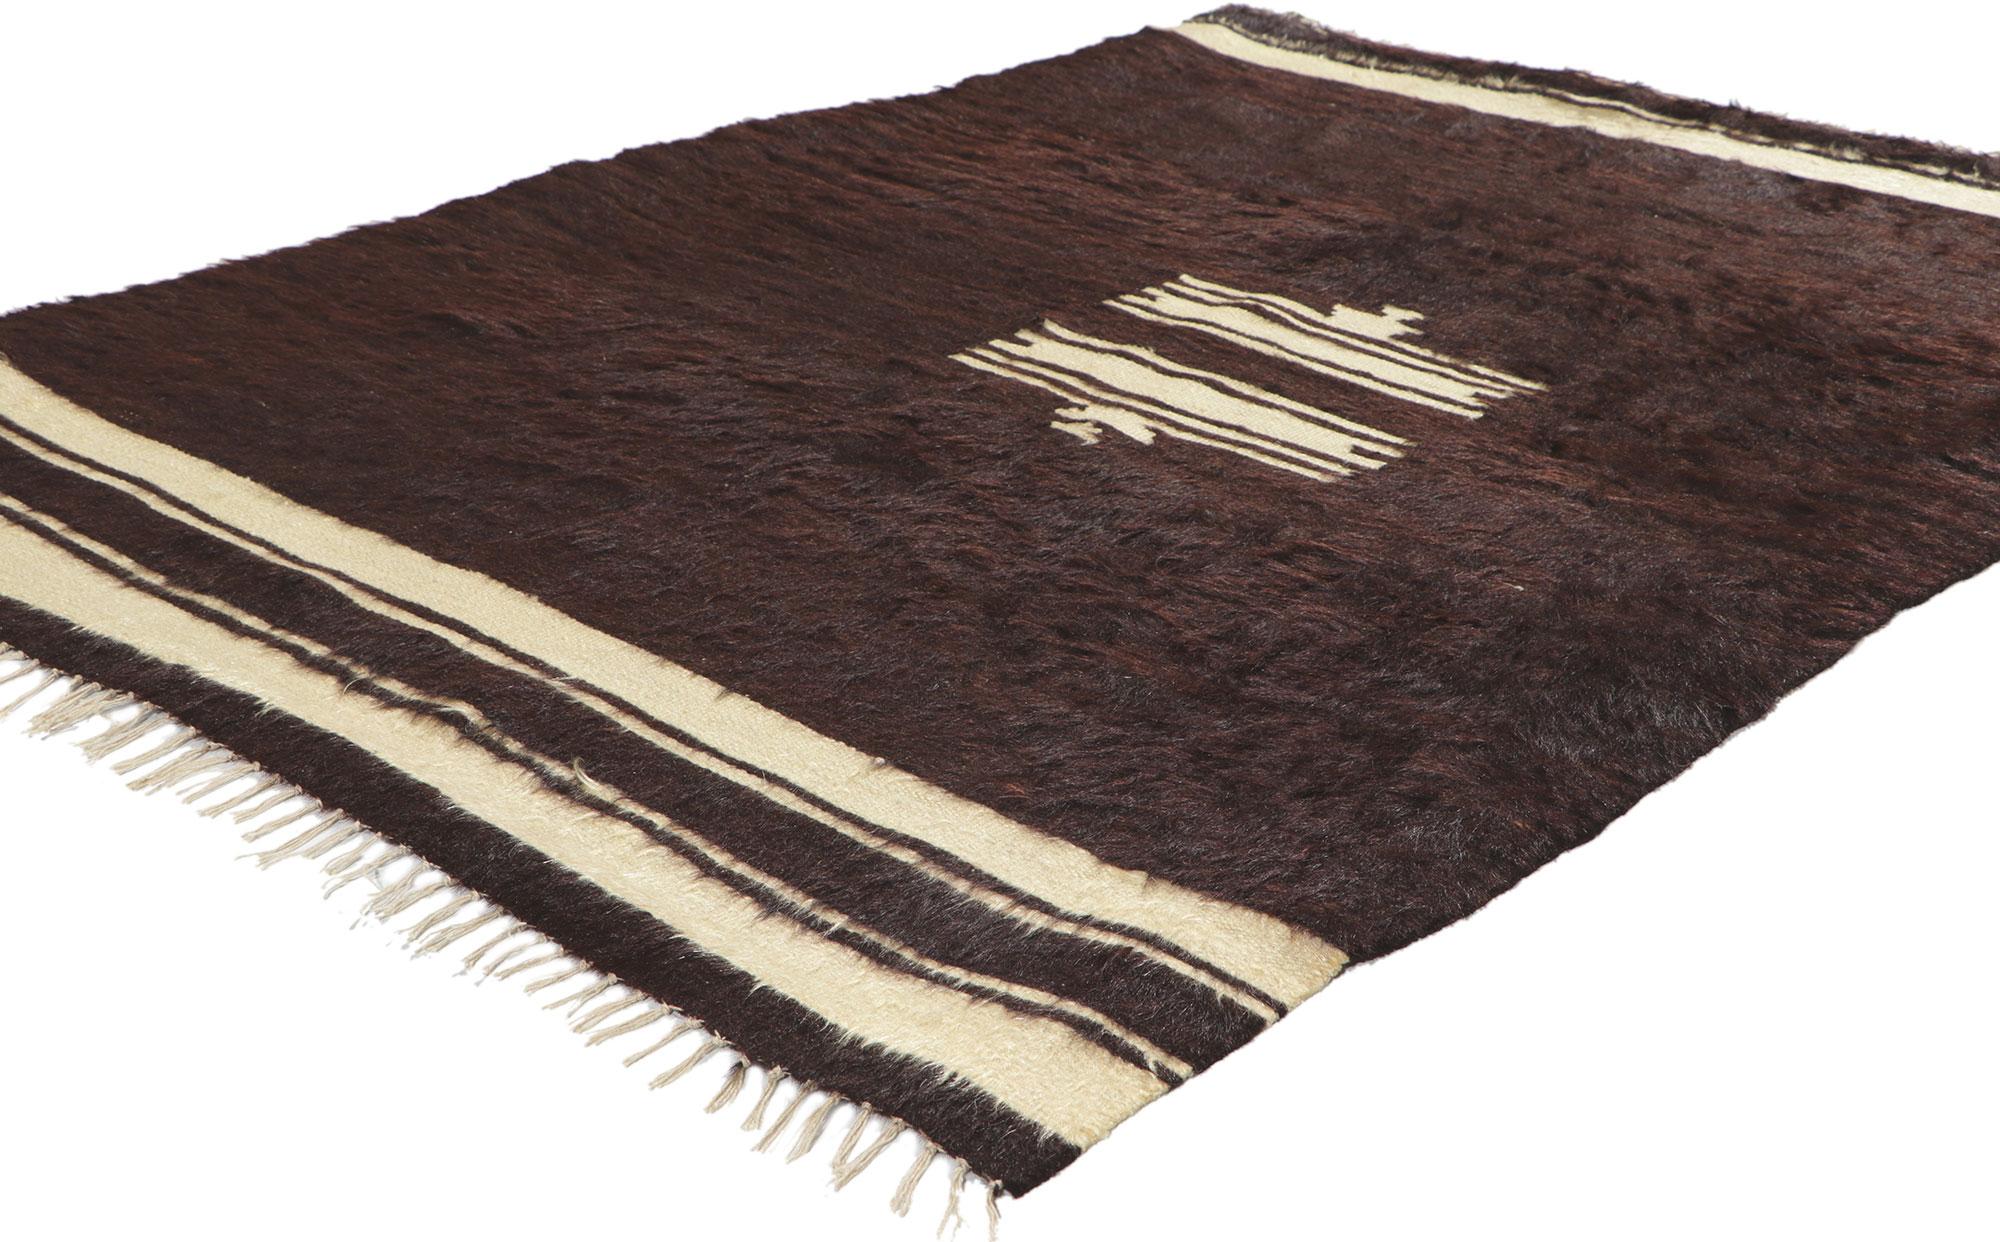 53838 vintage Turkish Angora wool kilim blanket rug, 03'09 x 05'01. With its shaggy pile, incredible detail and texture, this handwoven Turkish angora kilim rug is a captivating vision of woven beauty. The eye-catching geometric design and earthy